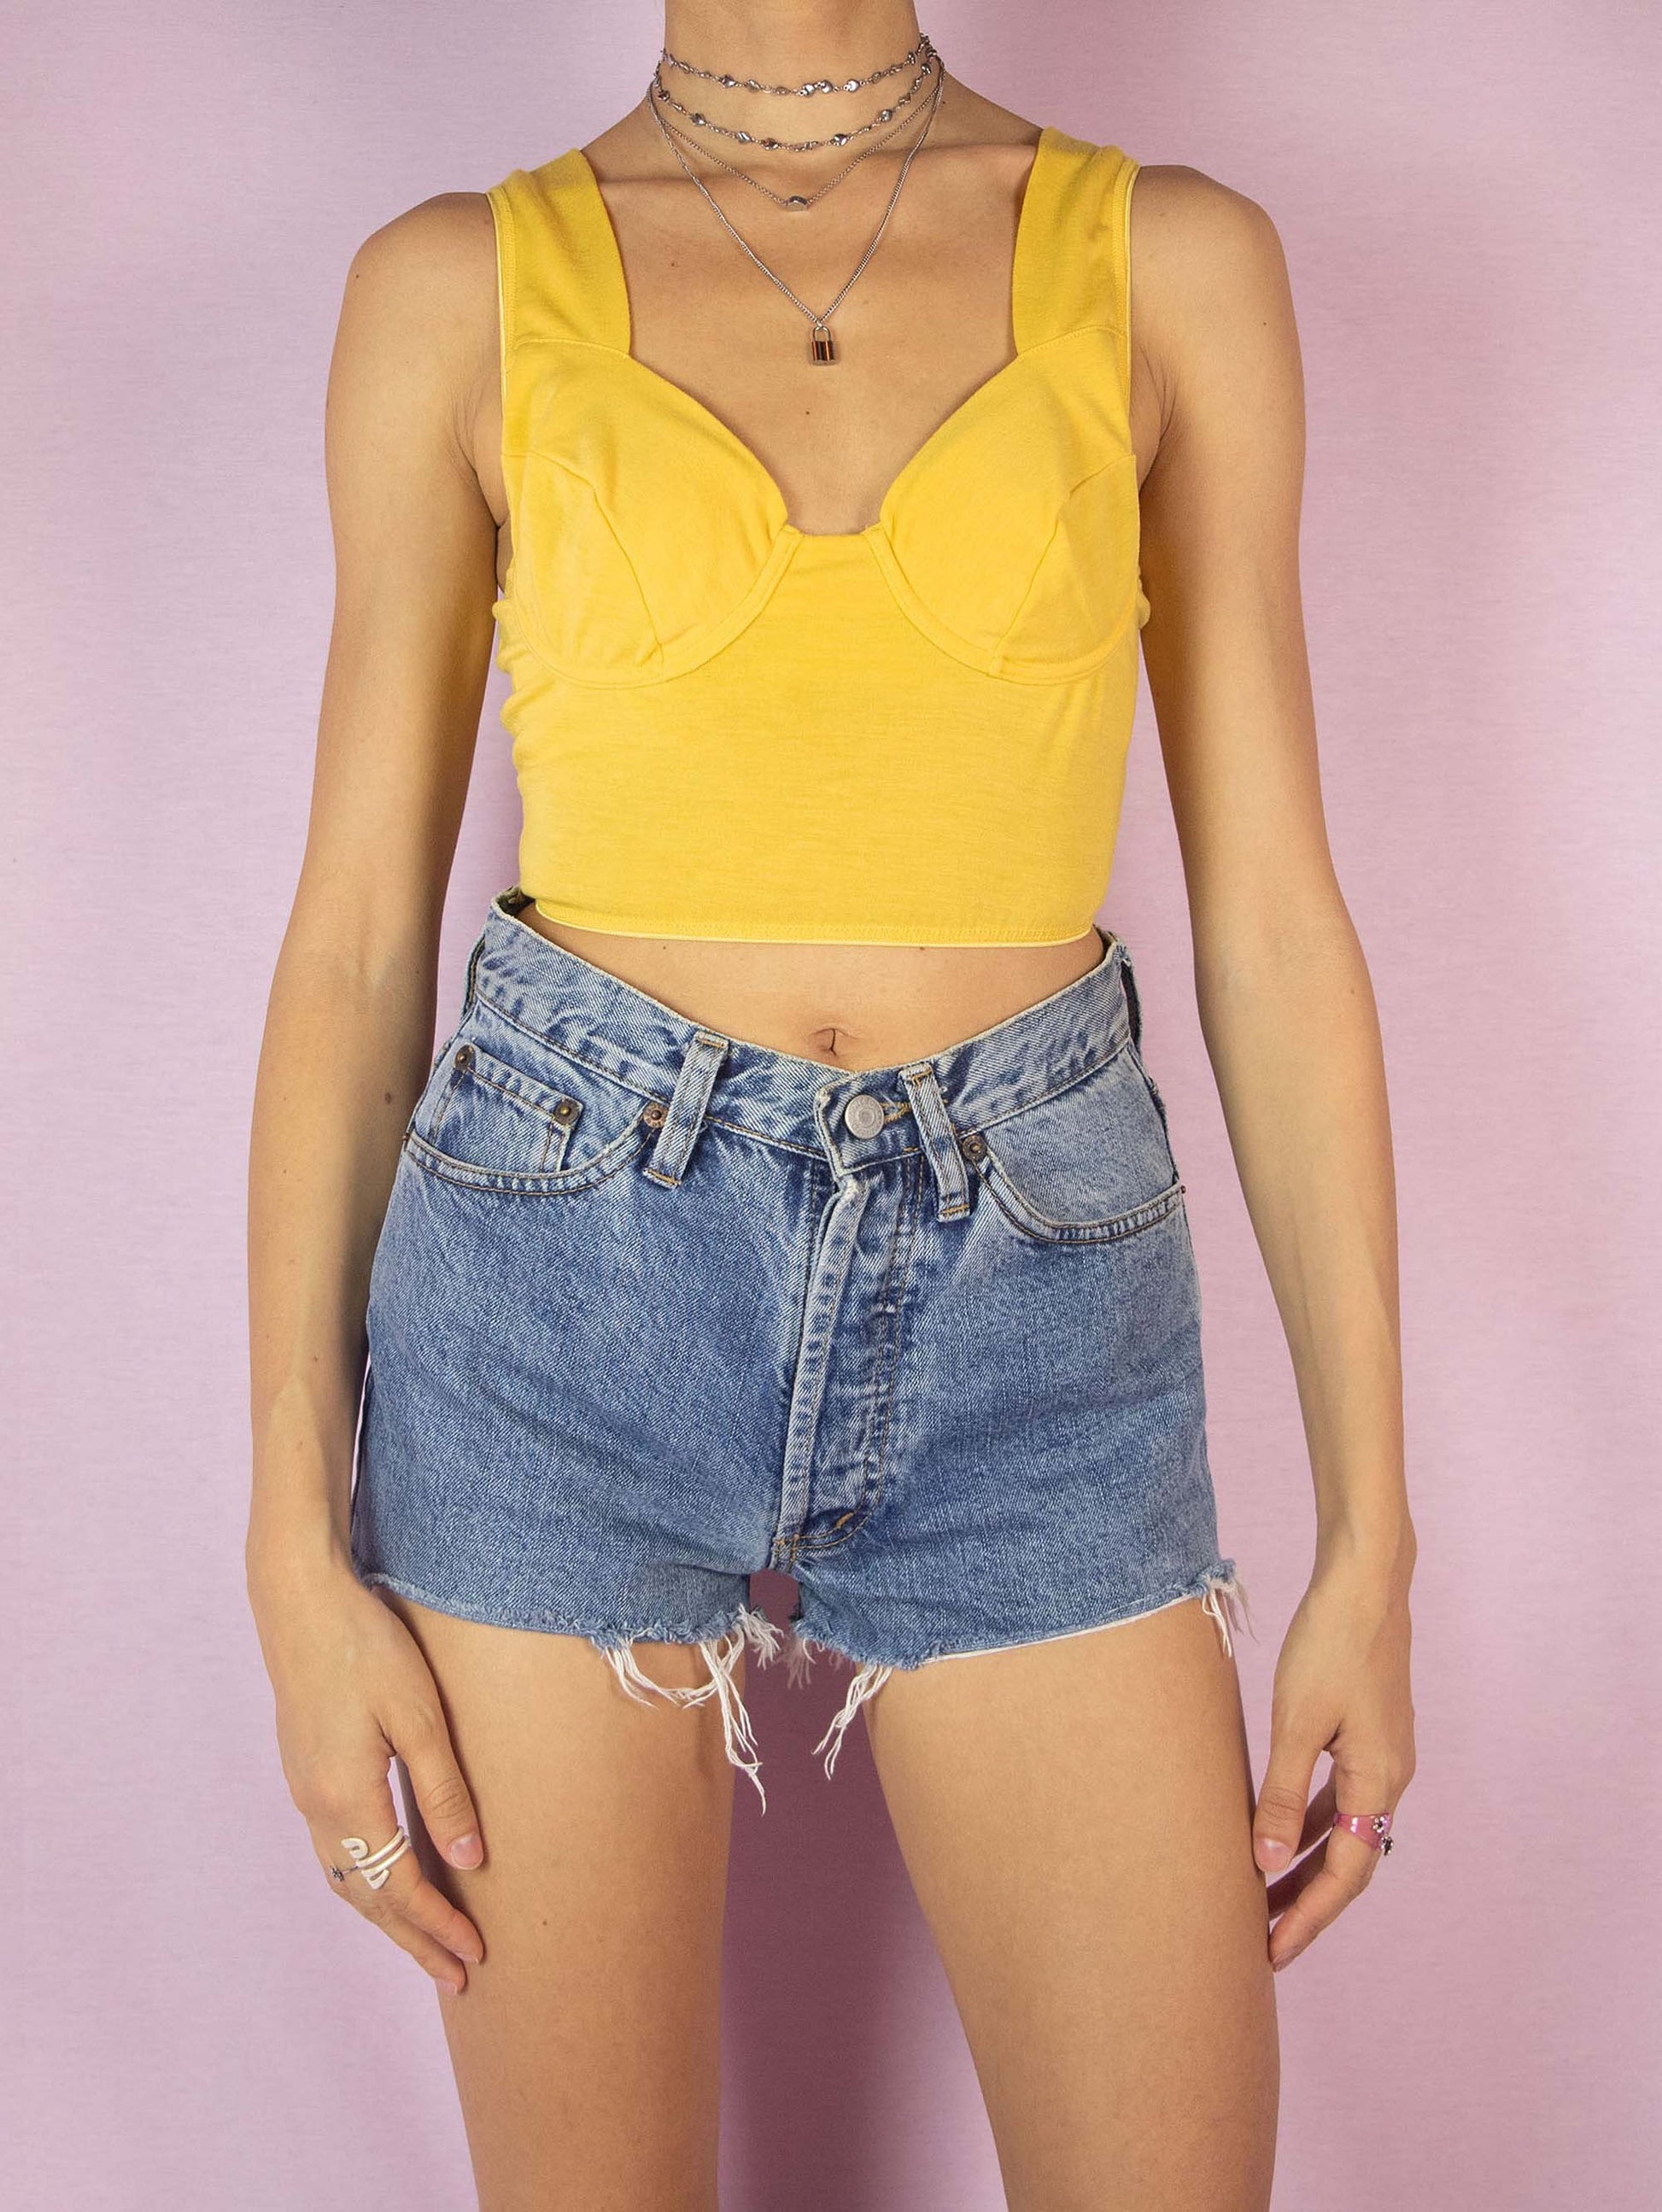 The Vintage 90s Yellow Bustier Crop Top is a sleeveless summer party top with elastic at the waist and wired underbust. Fits like an 85 EUR cup bra size.